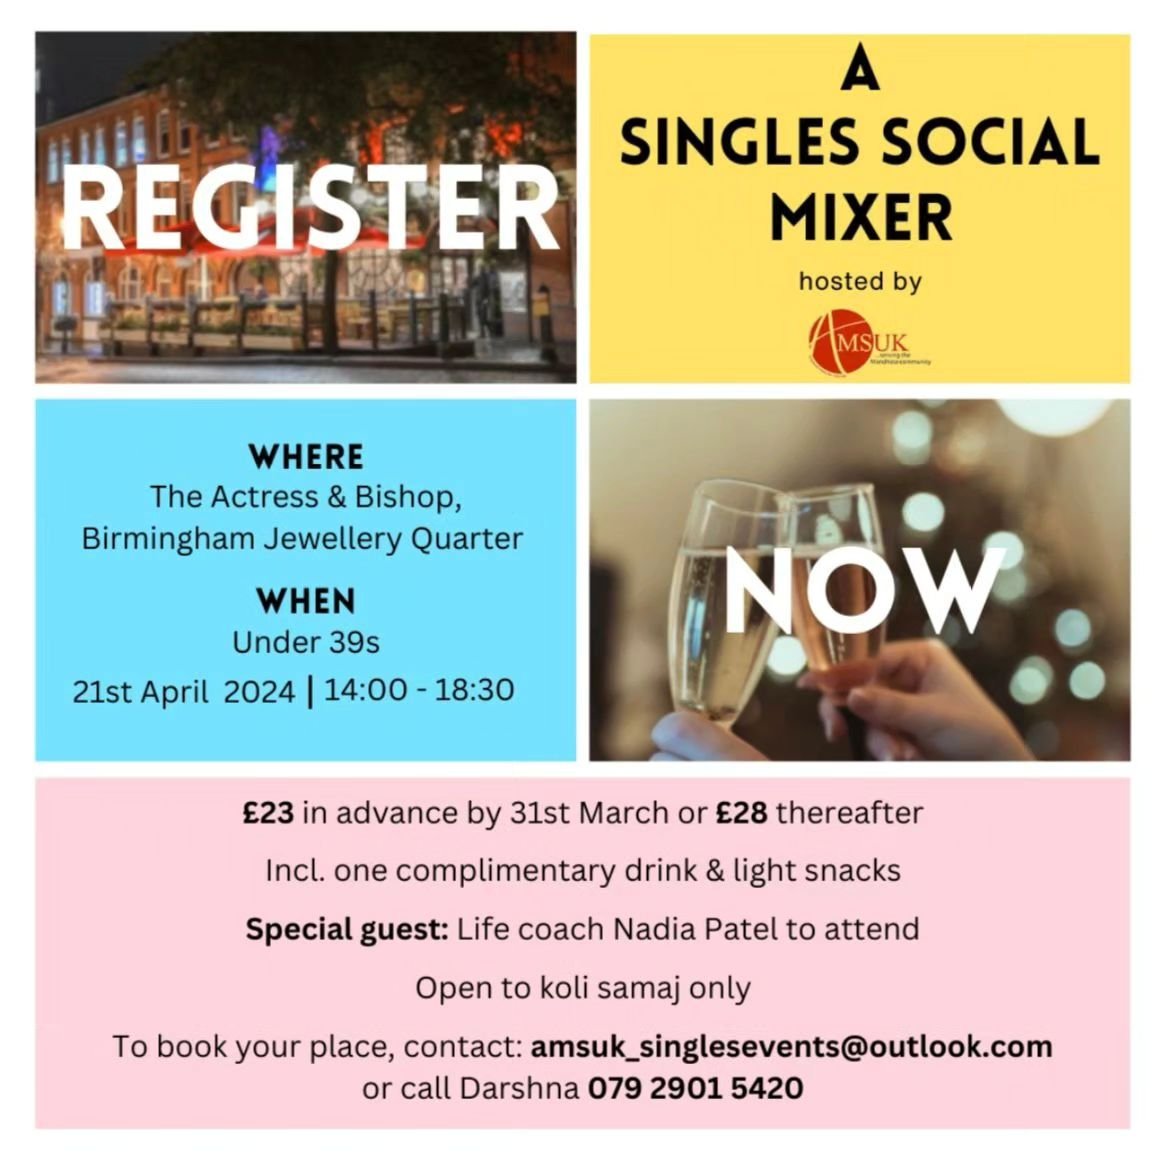 AMSUK - SINGLES EVENT 

With just over a week to go to our Singles event, there&rsquo;s still time to register to come along. 

Join us for an opportunity to meet other singles in person, in a relaxed and sophisticated setting where you'll be surroun